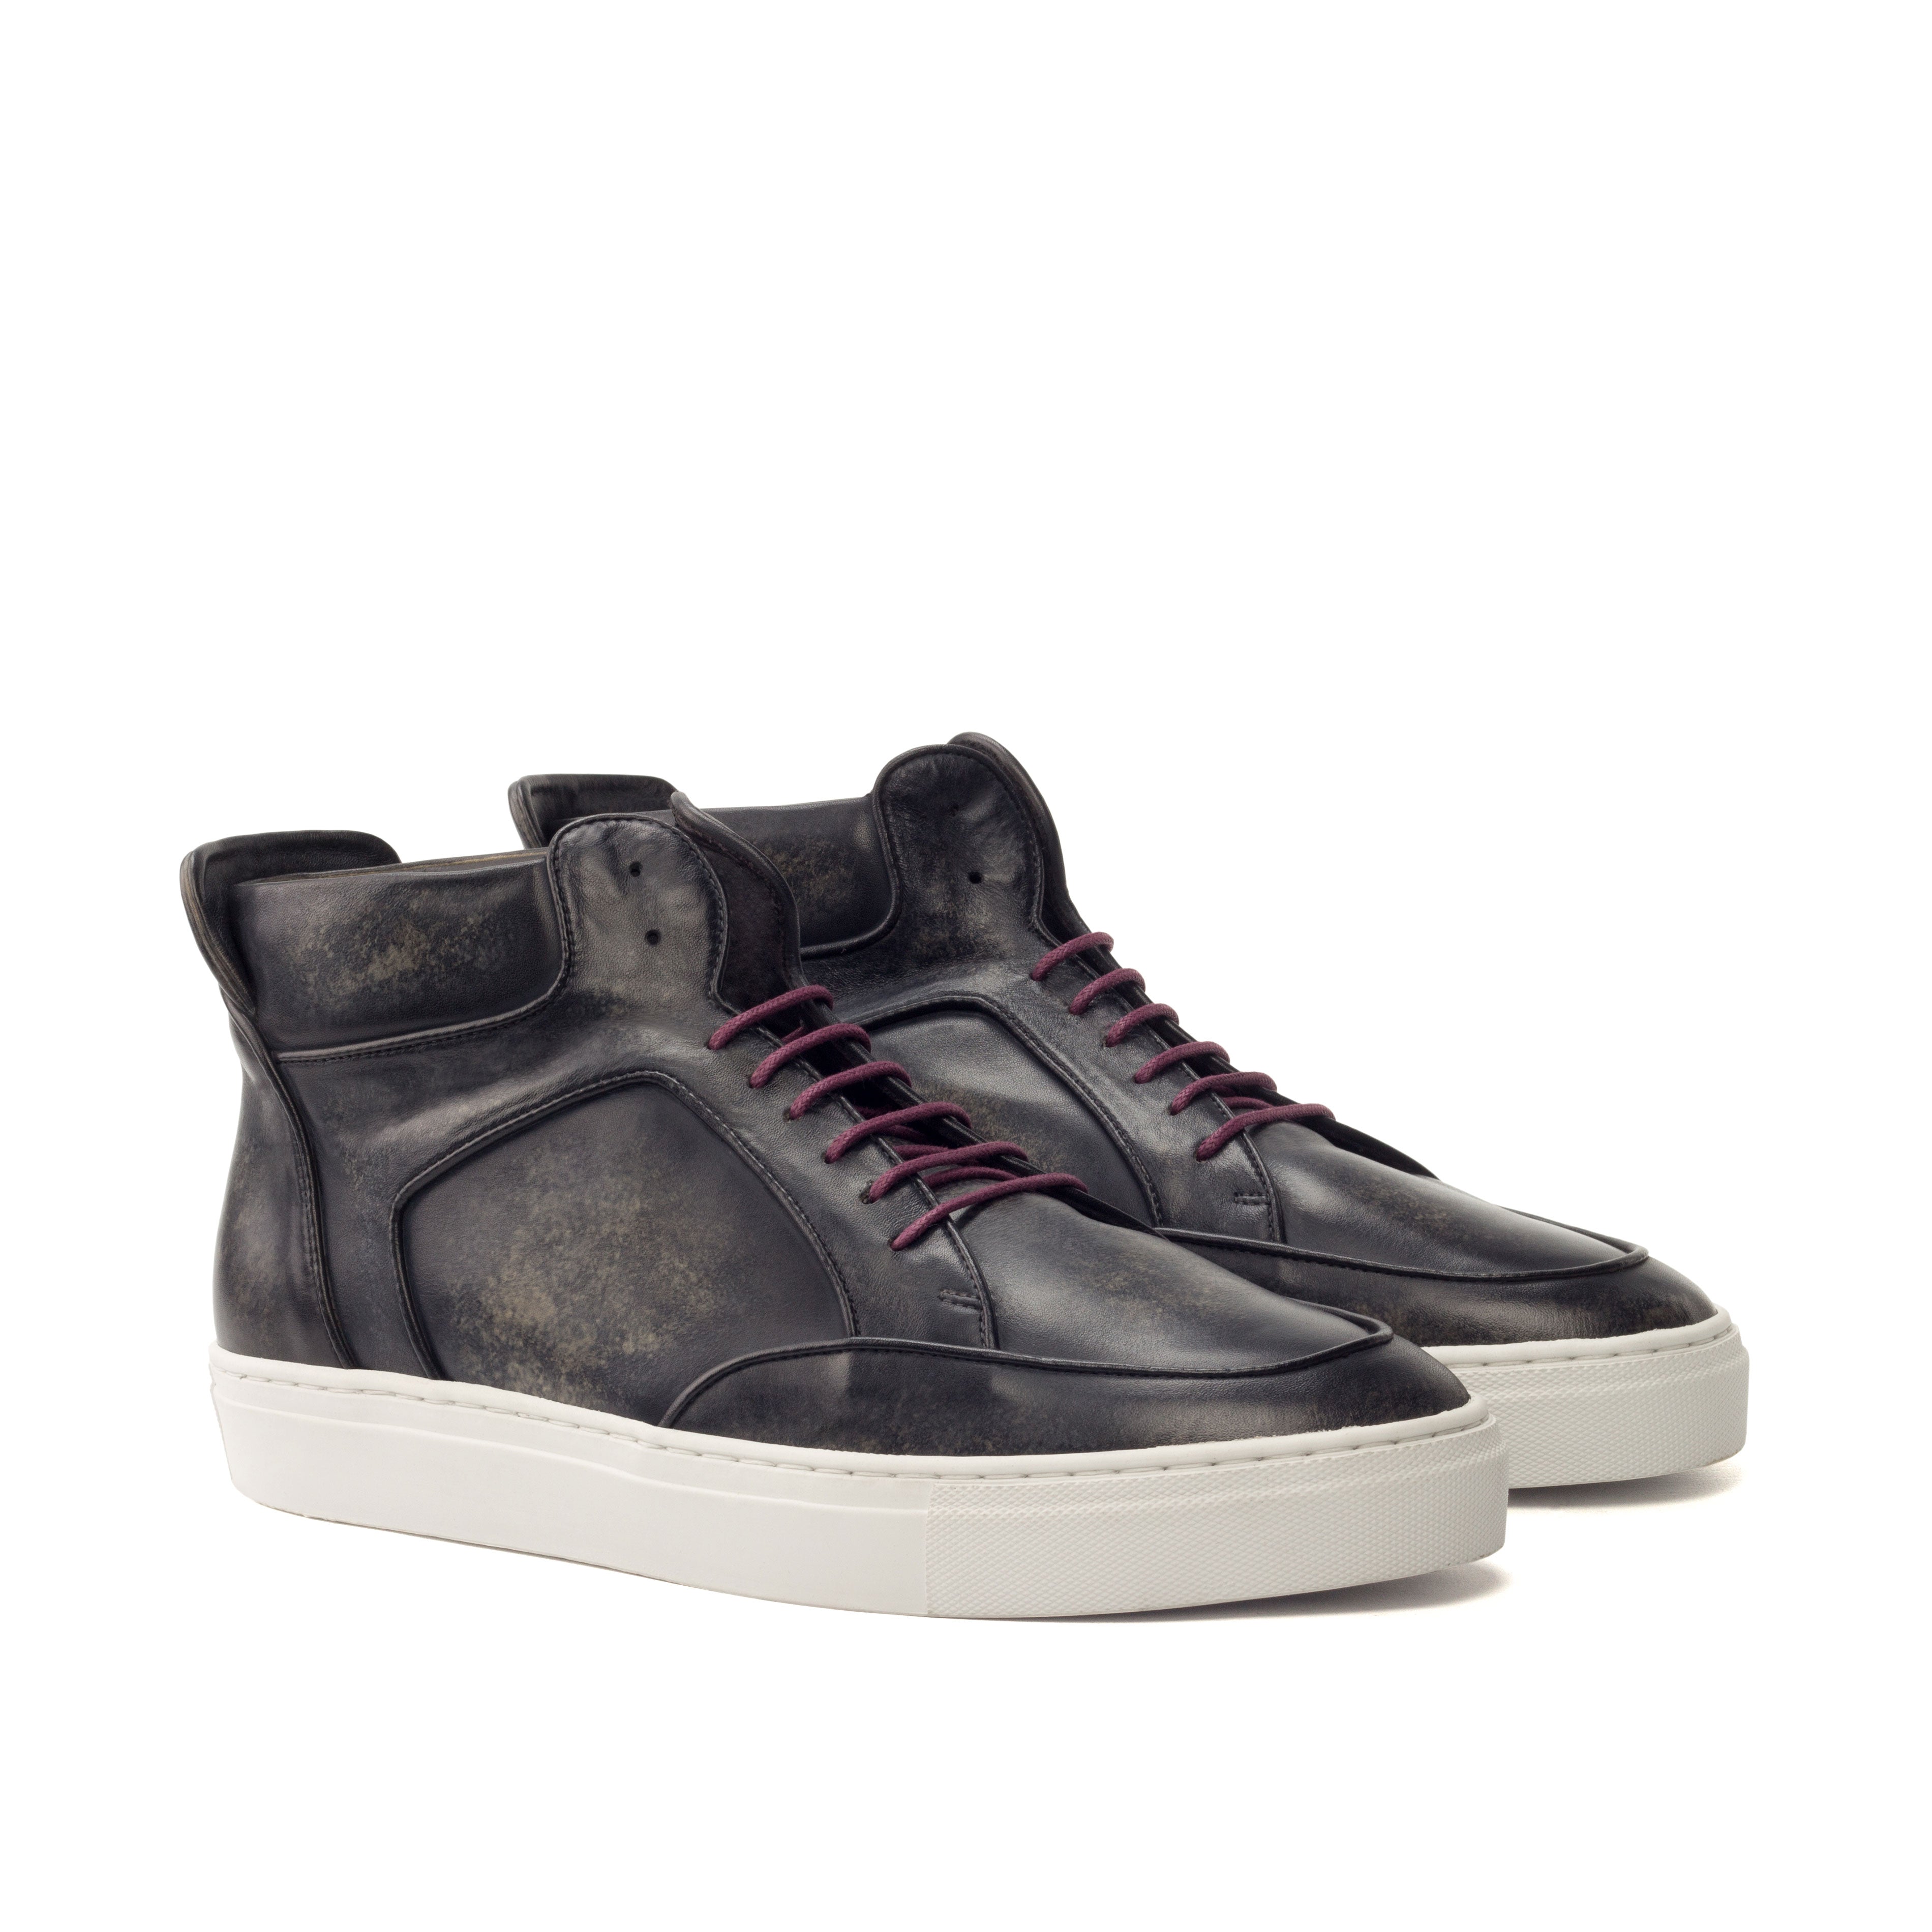 High Sneakers marble grey patina